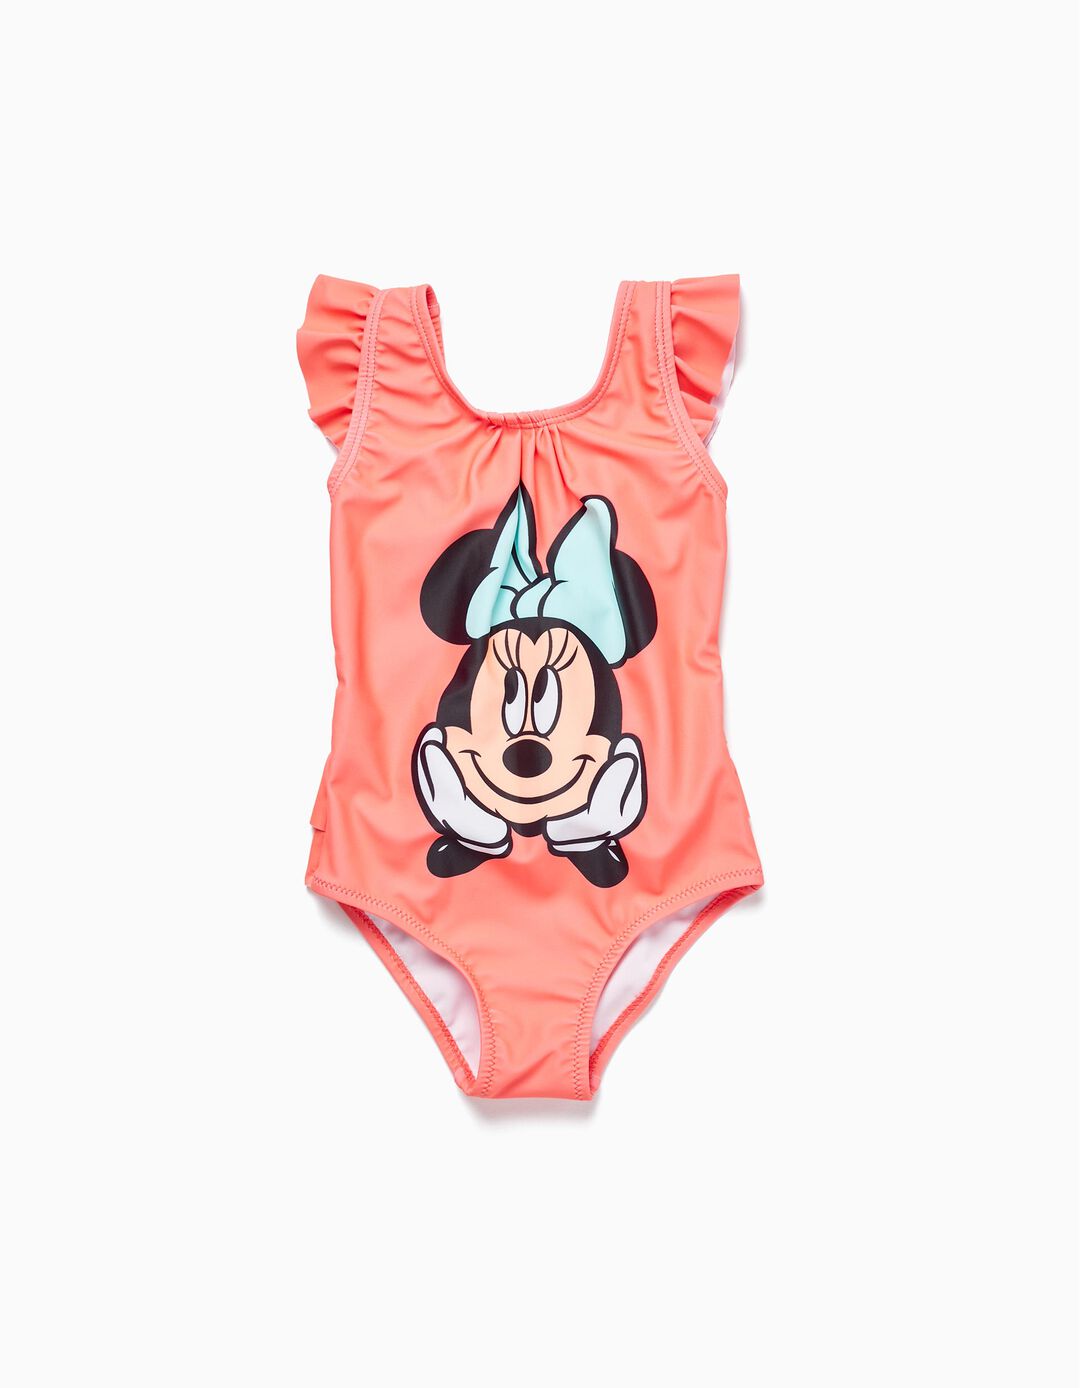 Swimsuit UV 80 Protection for Baby Girls 'Minnie', Coral